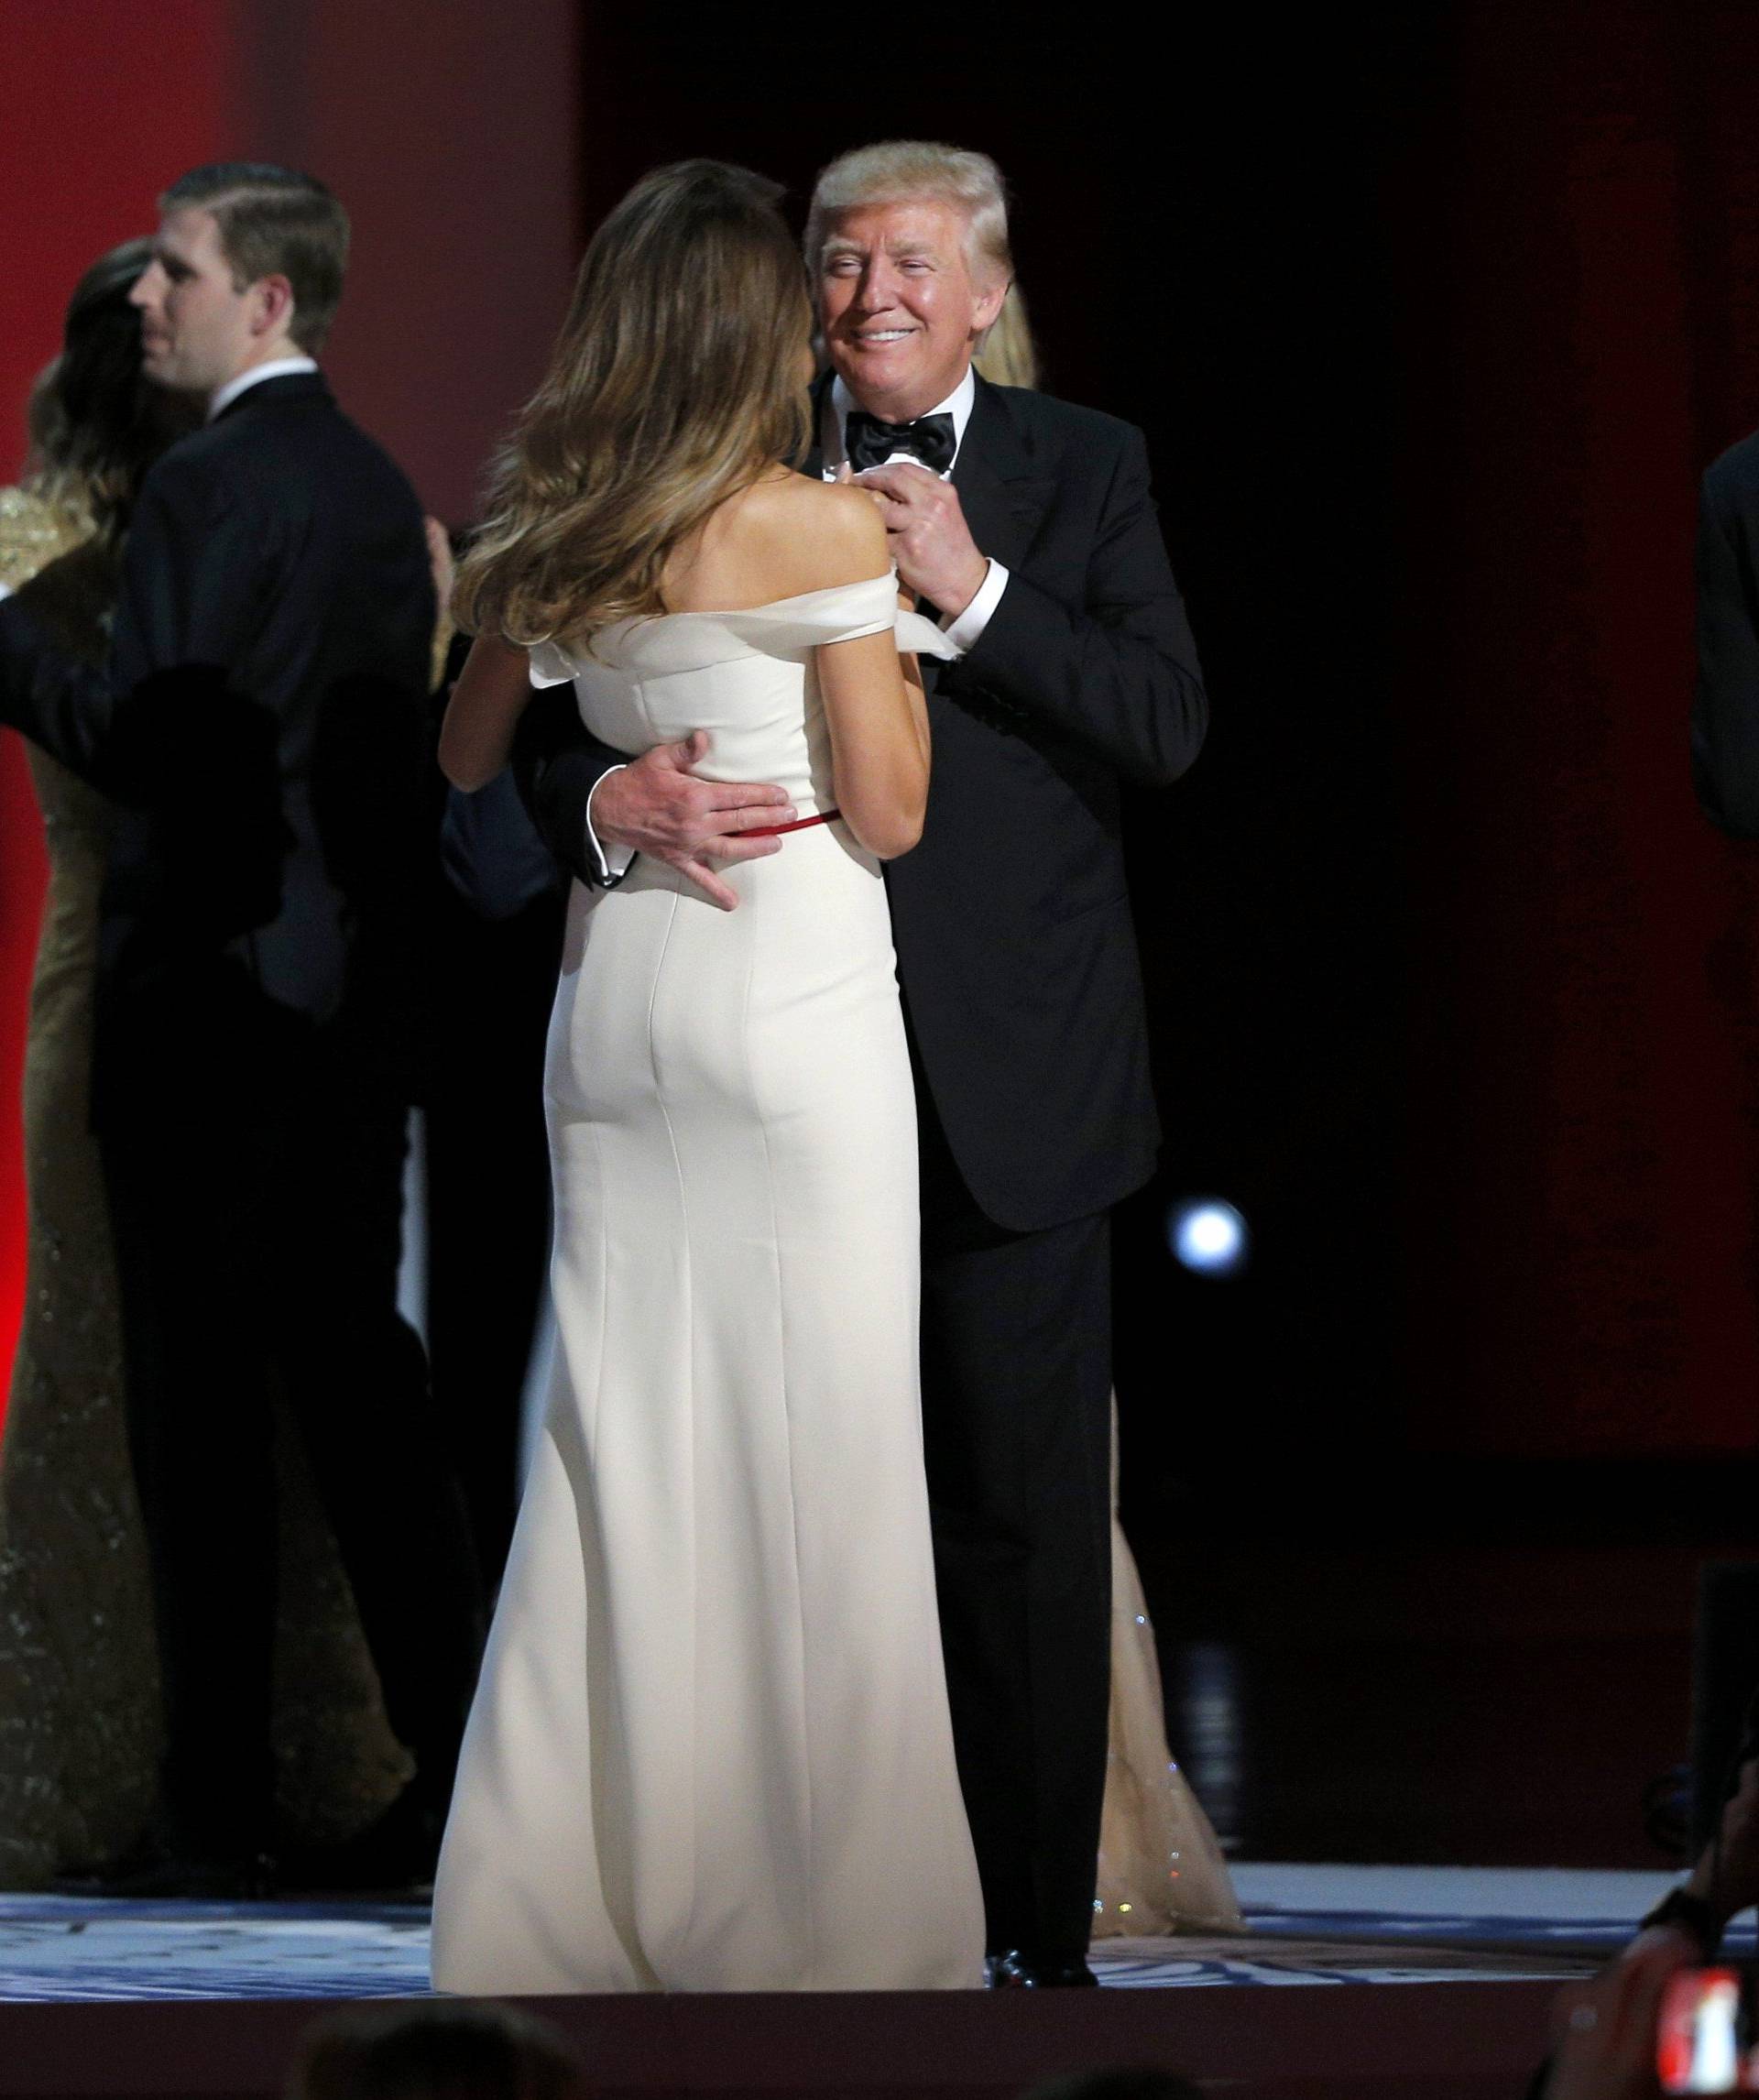 U.S. President Donald Trump and his wife, first lady Melania Trump, dance their first dance as first couple to the song "My Way" at his "Liberty" Inaugural Ball in Washington